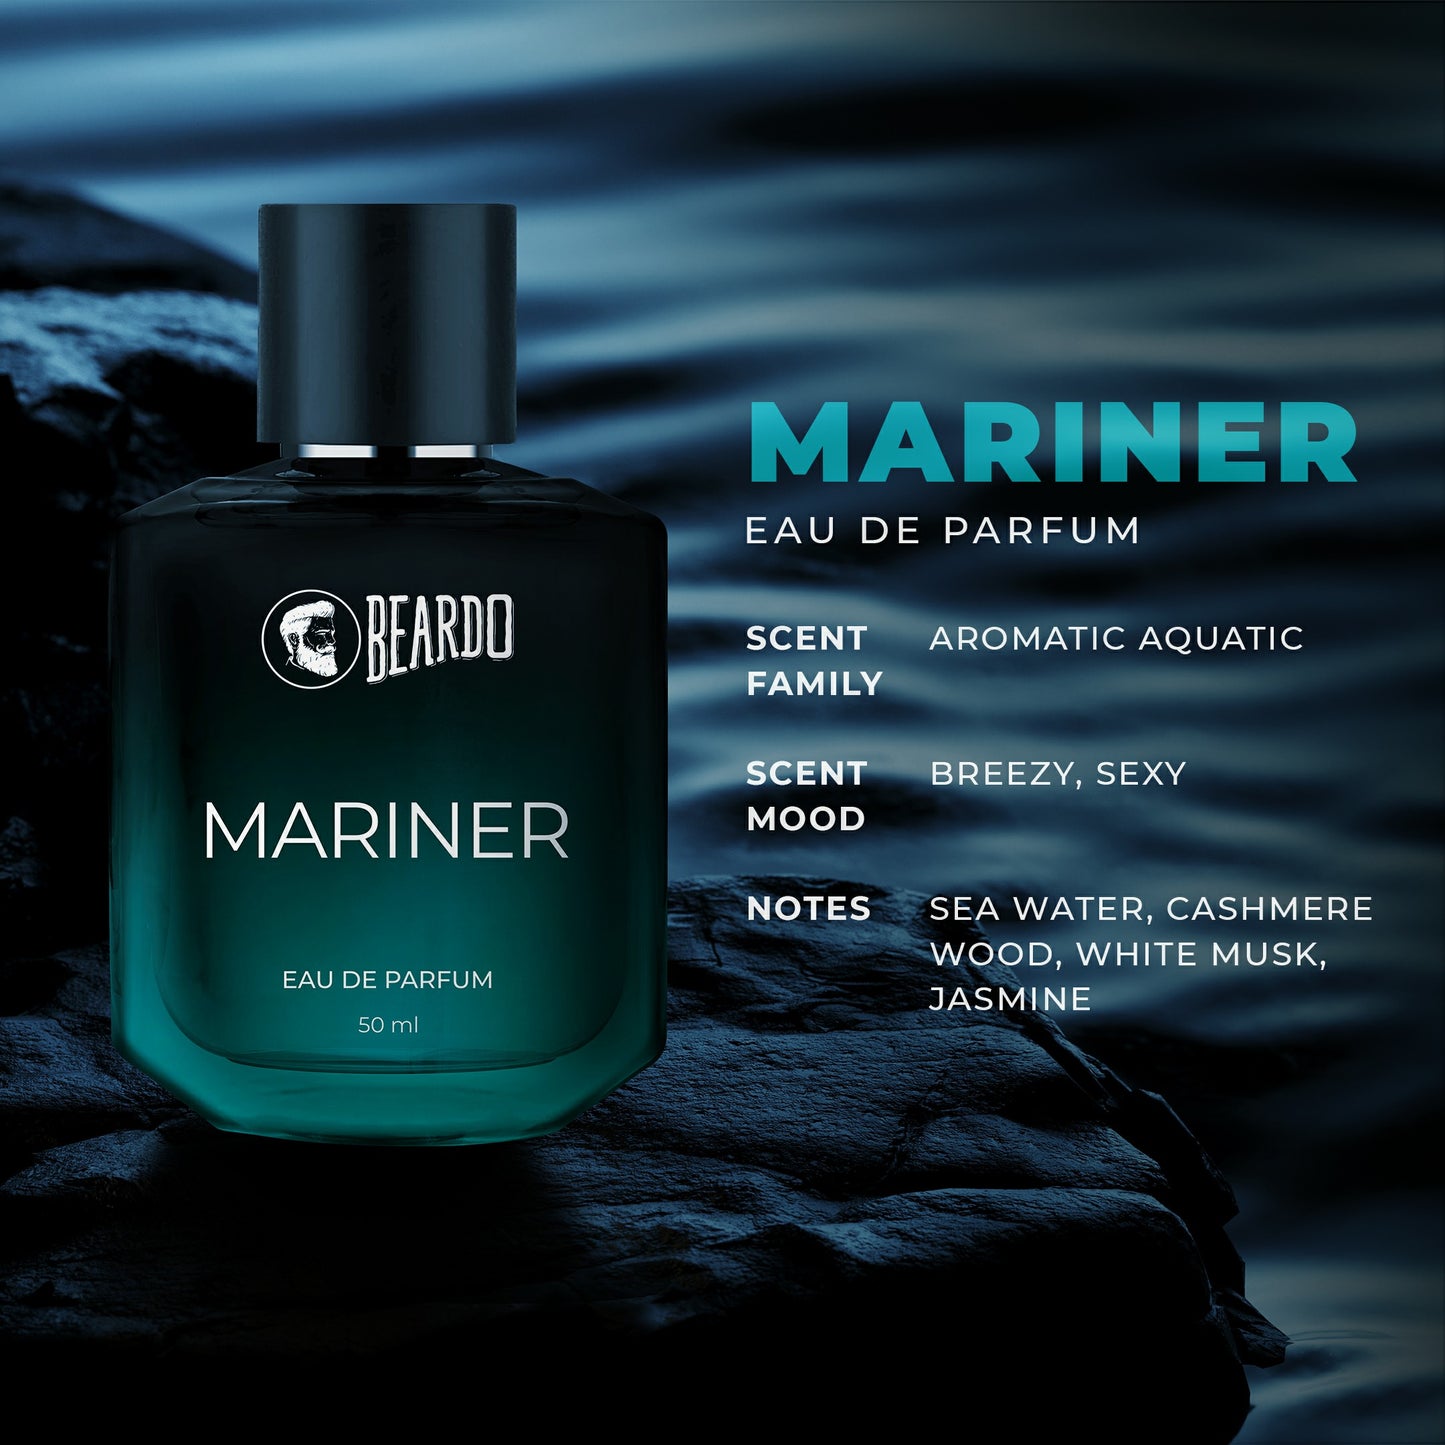 aquatic scent, breezy scent, wood, white musk